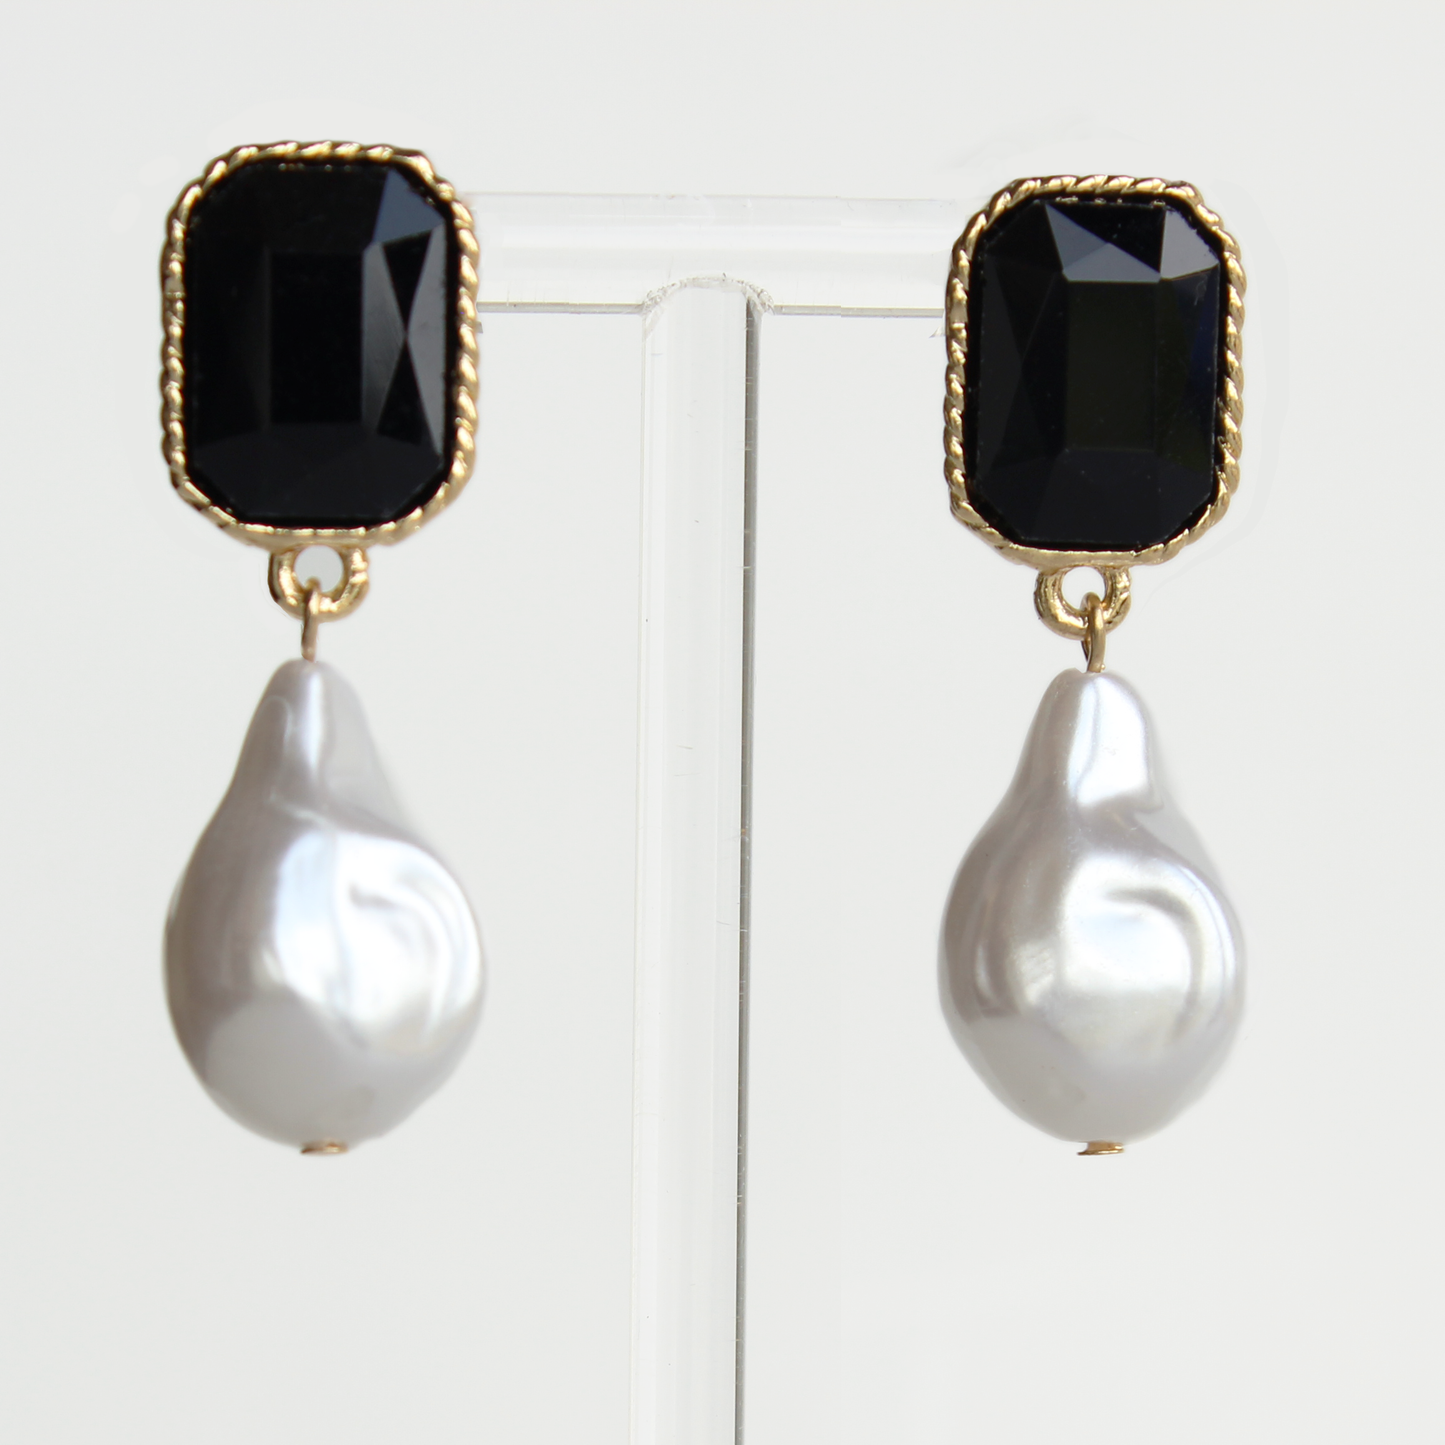 Black crystal and large baroque pearl earrings